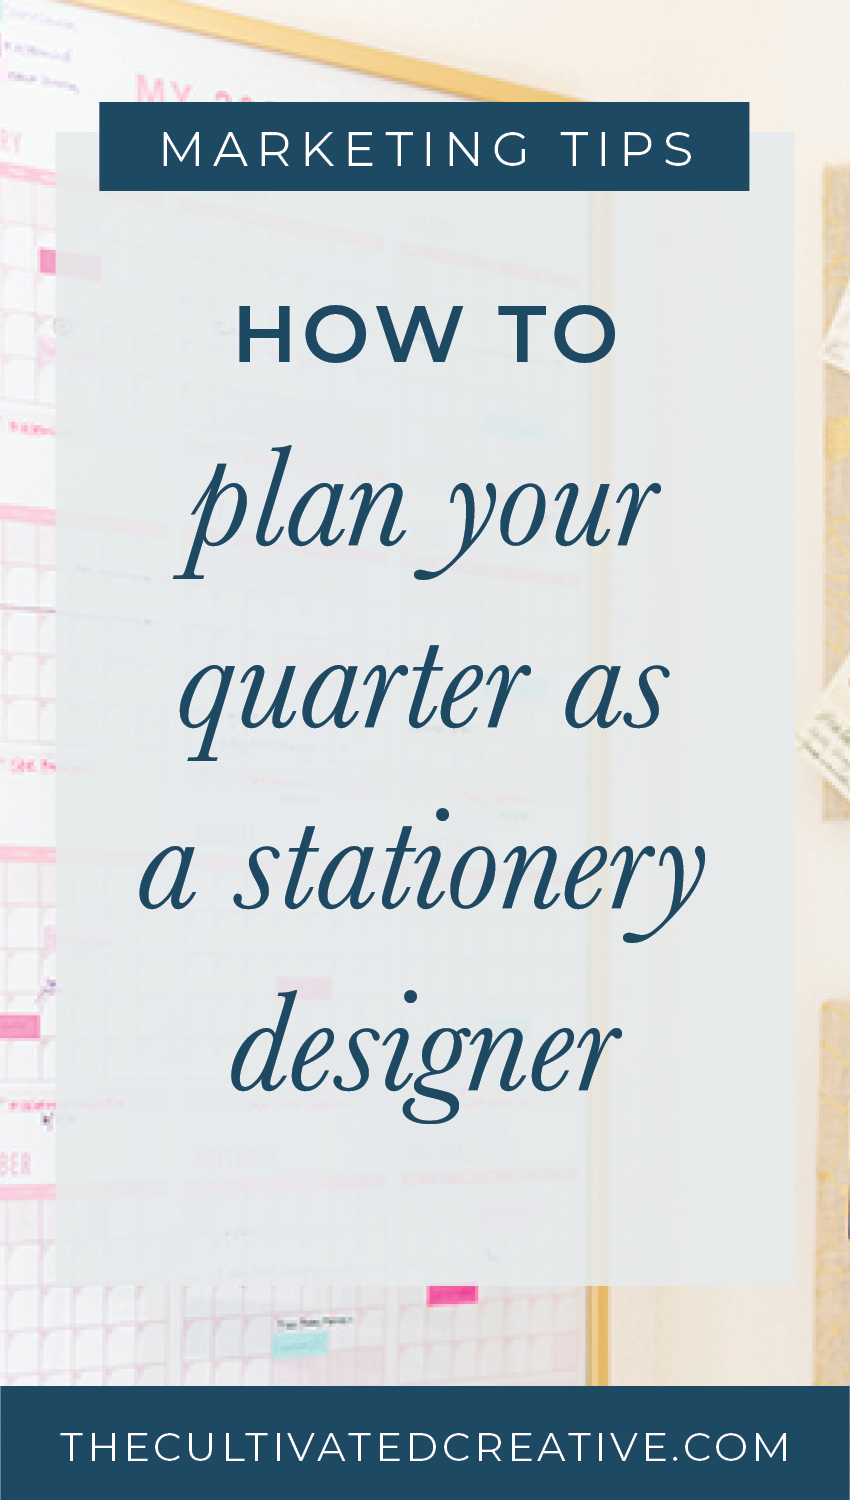 planning out your quarter as a stationer